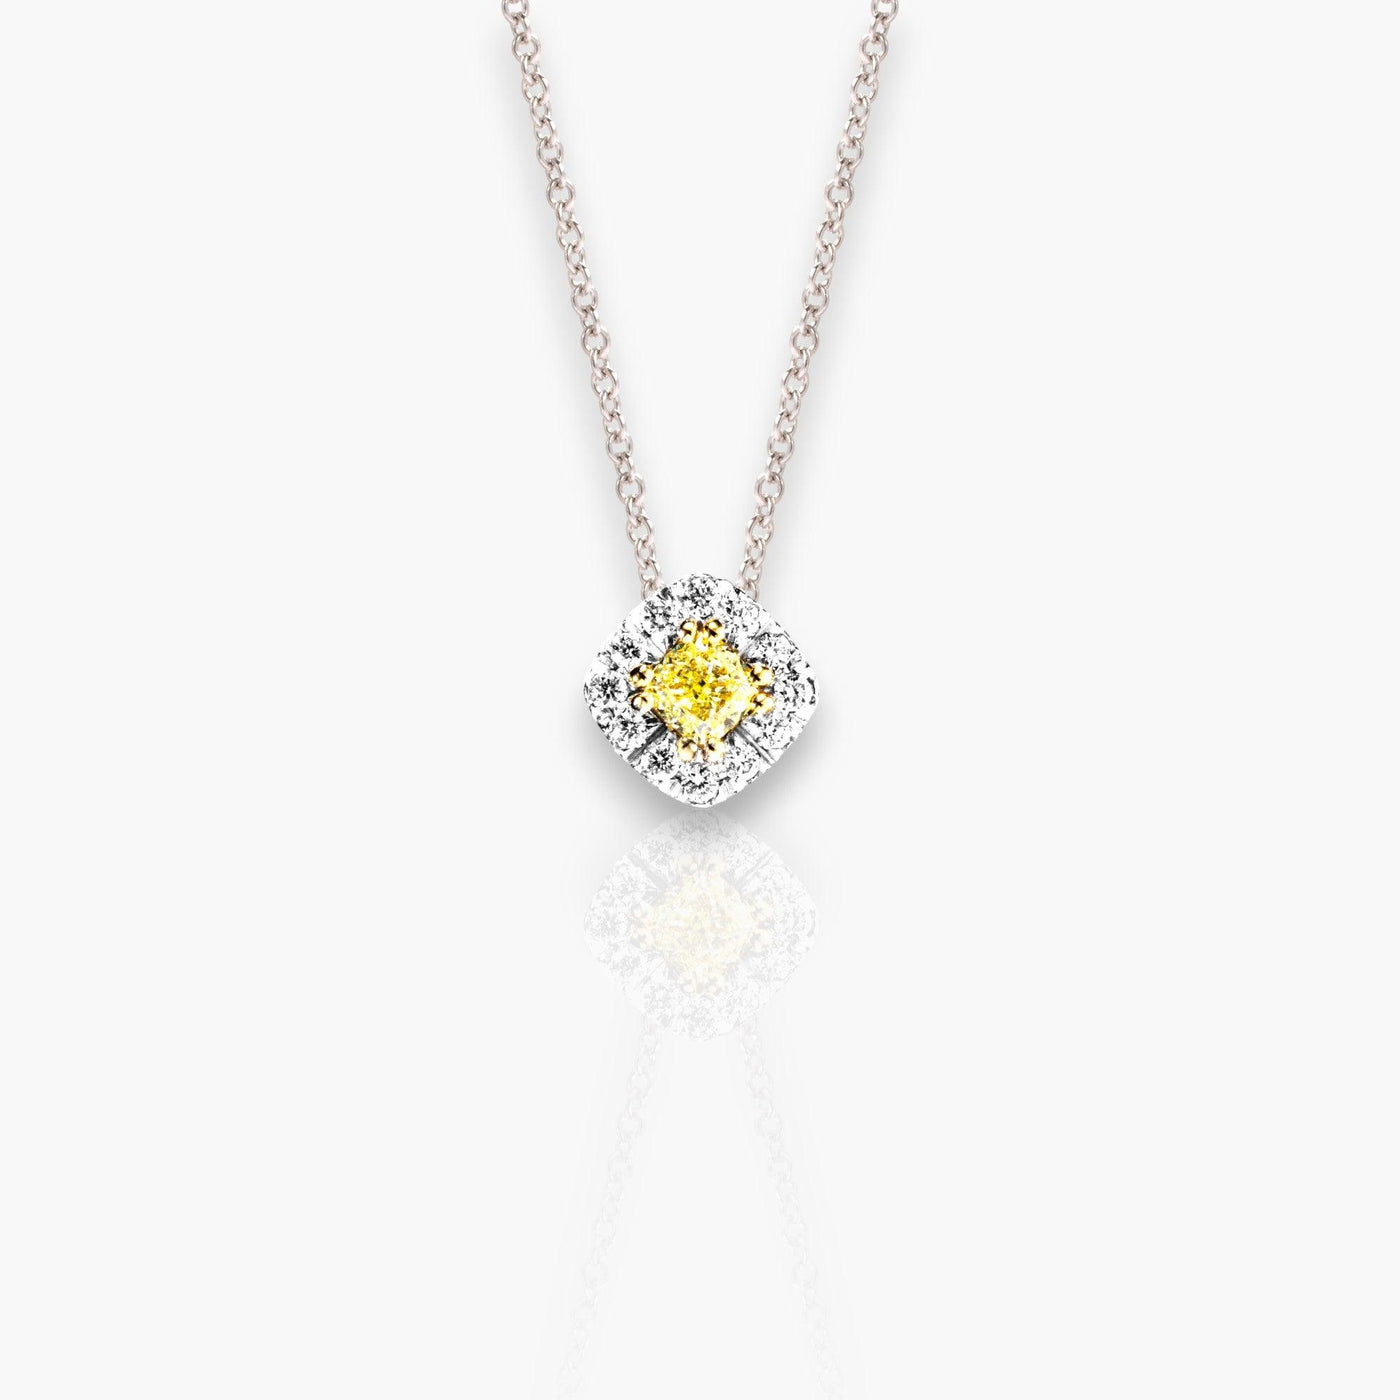 White Gold Necklace with fancy yellow diamond - Moregola Fine Jewelry